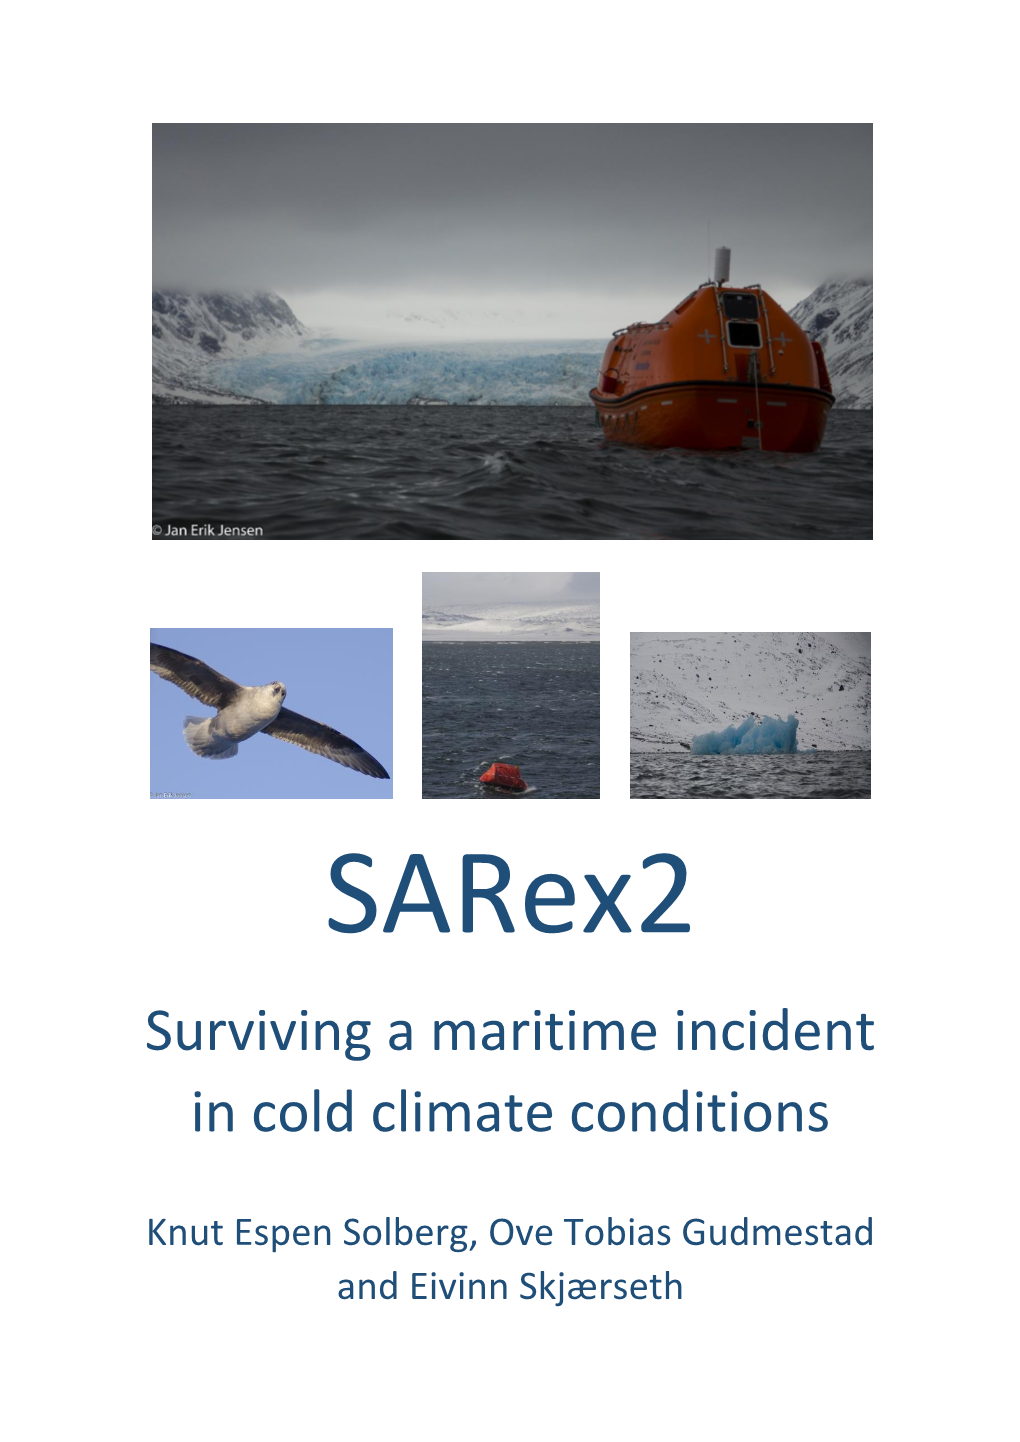 In Norwegian Coast Guard Personnel on Emergency Procedures in Cold Climate Conditions, with Particular Reference to Evacuation and Rescue from Cruise Ships